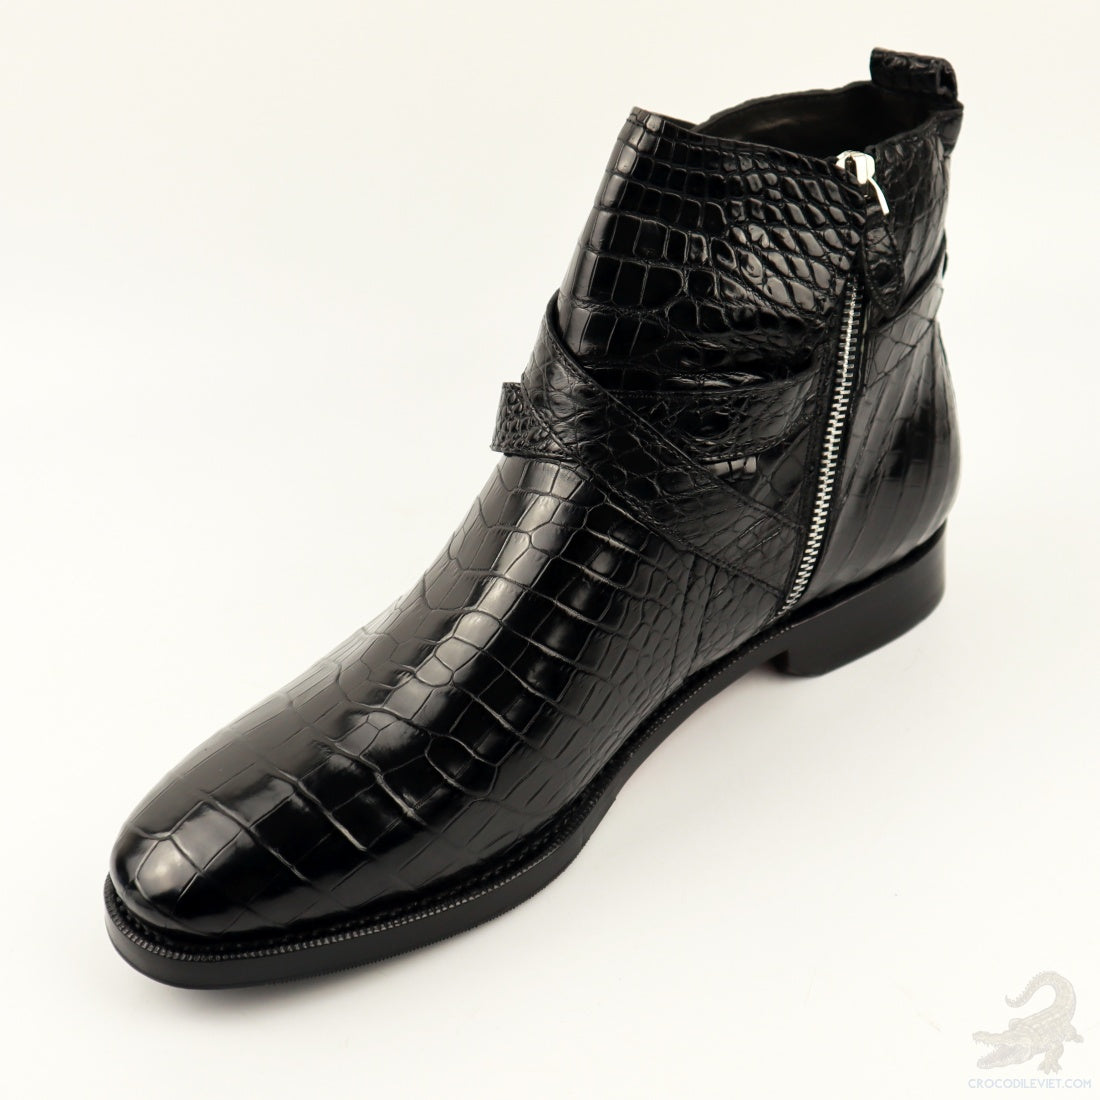 Men’s Handcrafted Alligator Crocodile Leather Buckle Ankle Boots Black